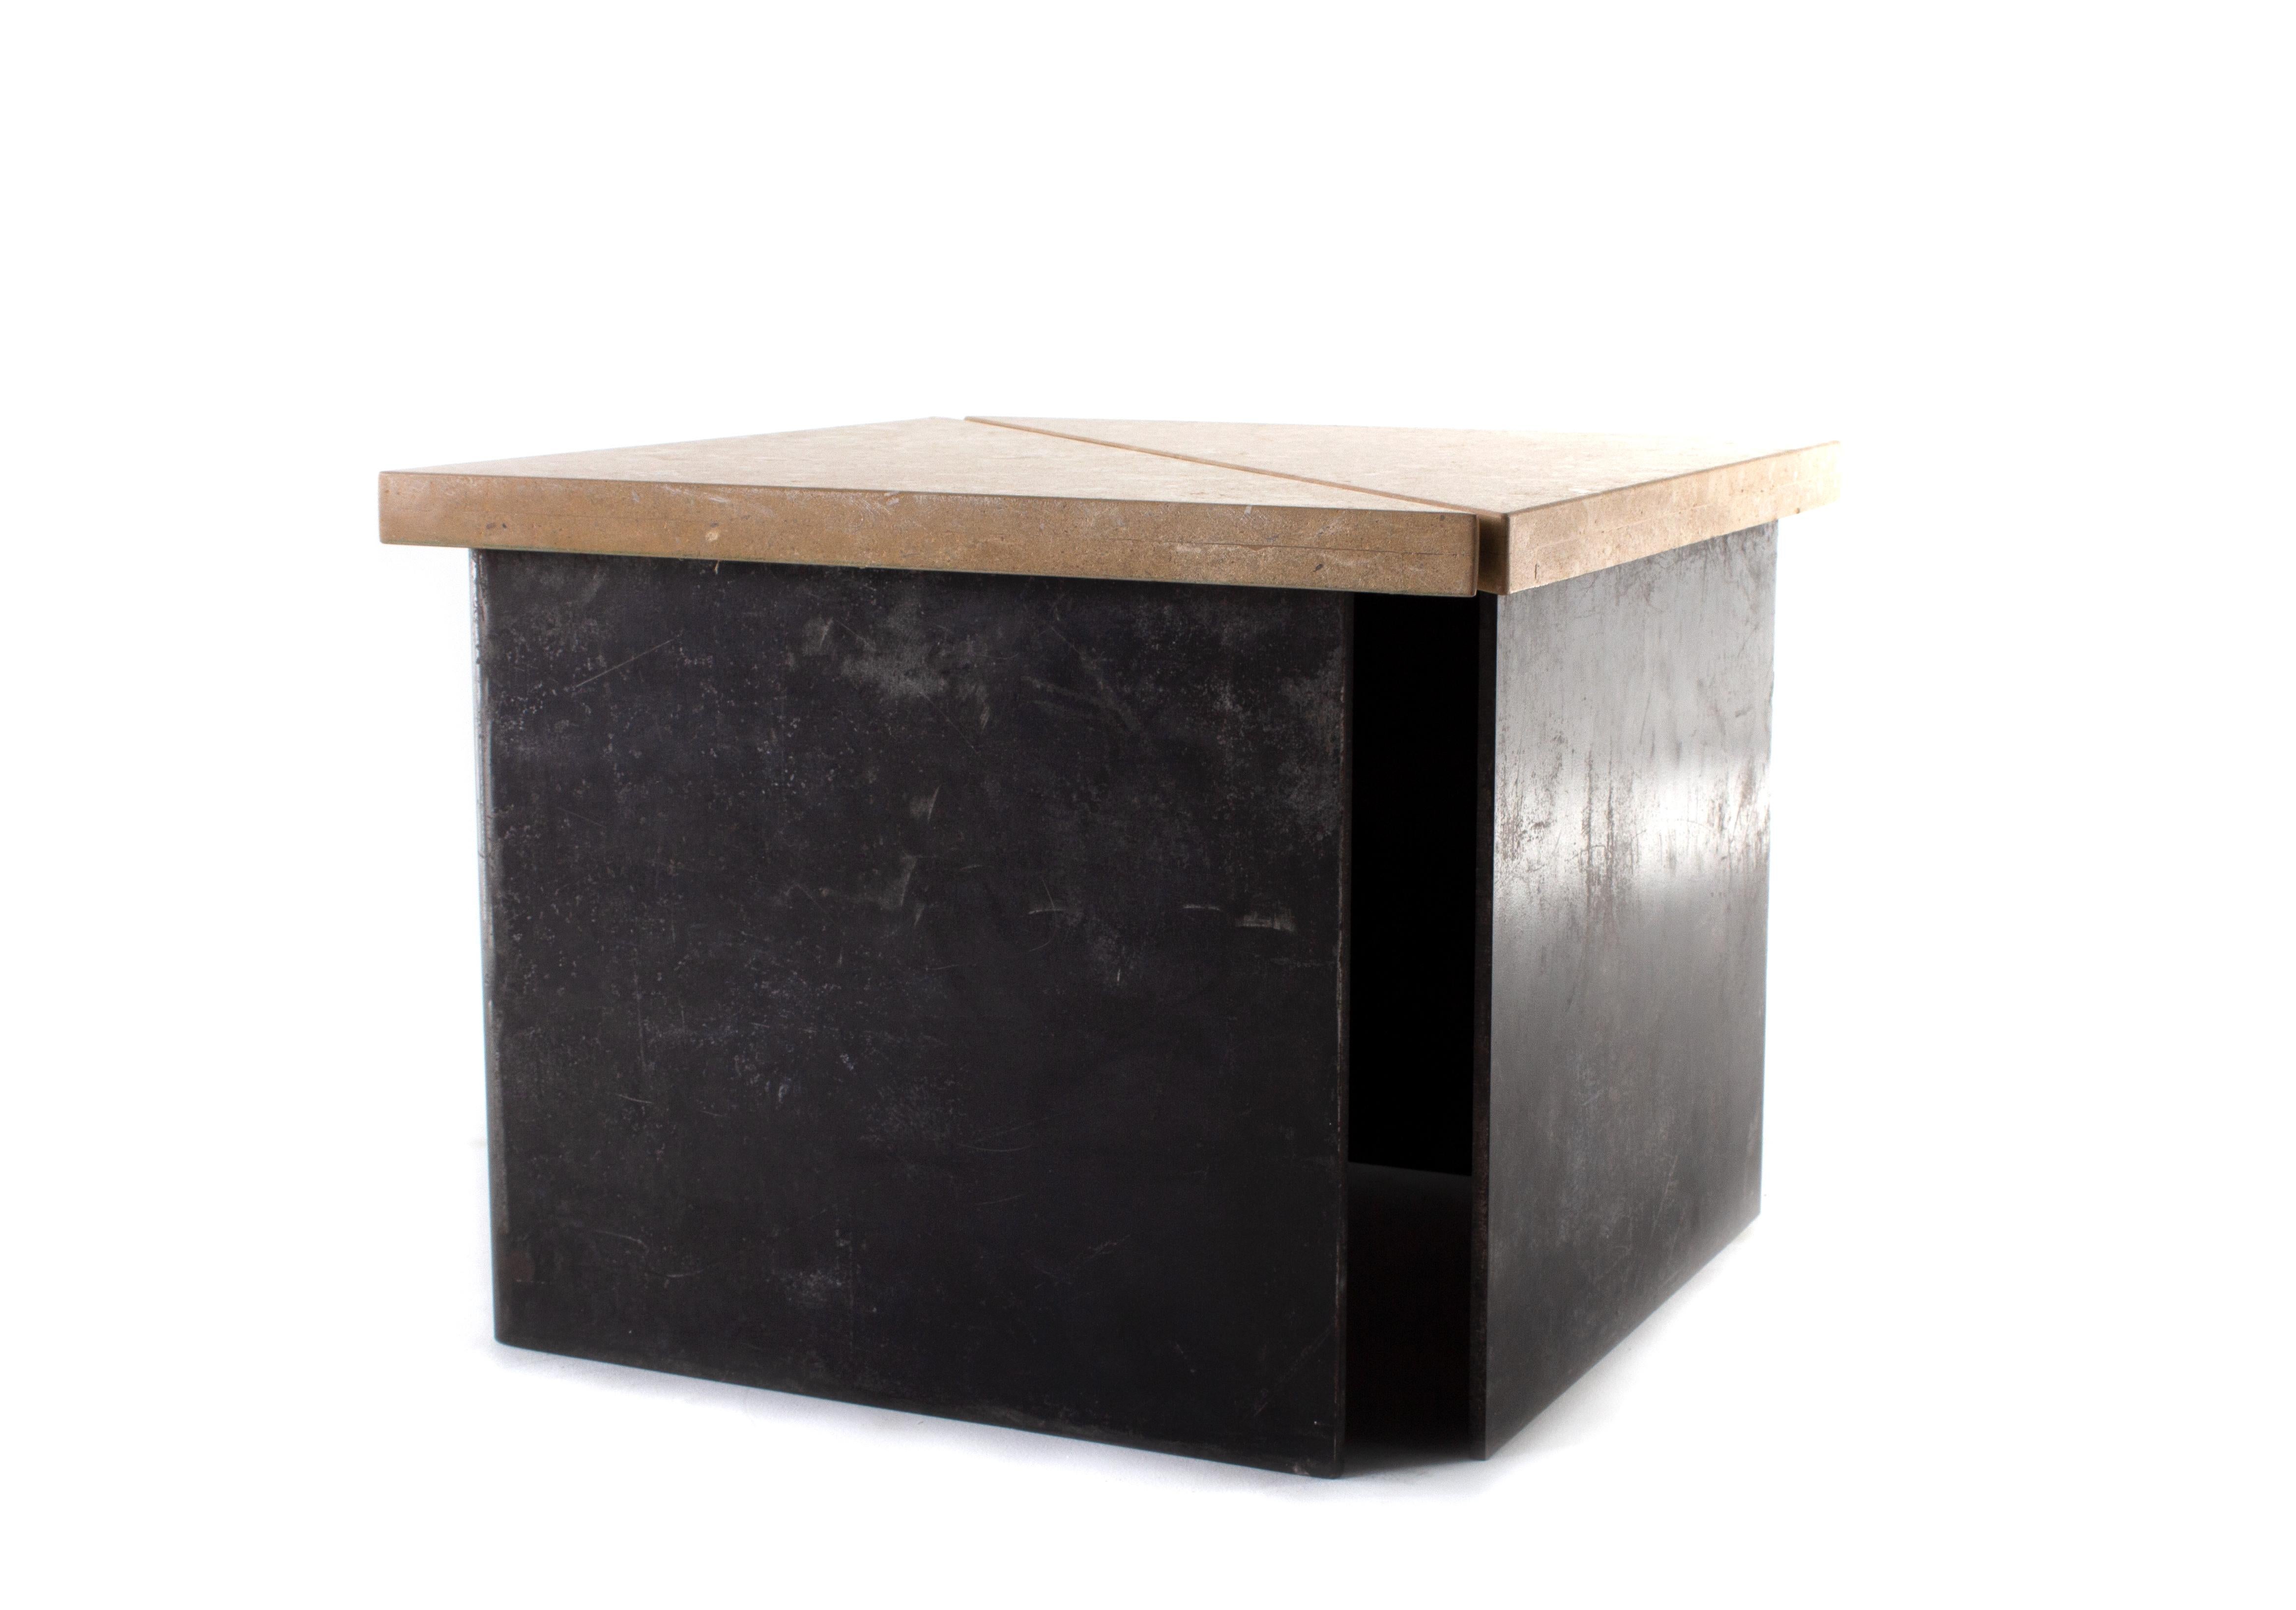 Transitional style right Angle steel end table with Jura gray stone top.